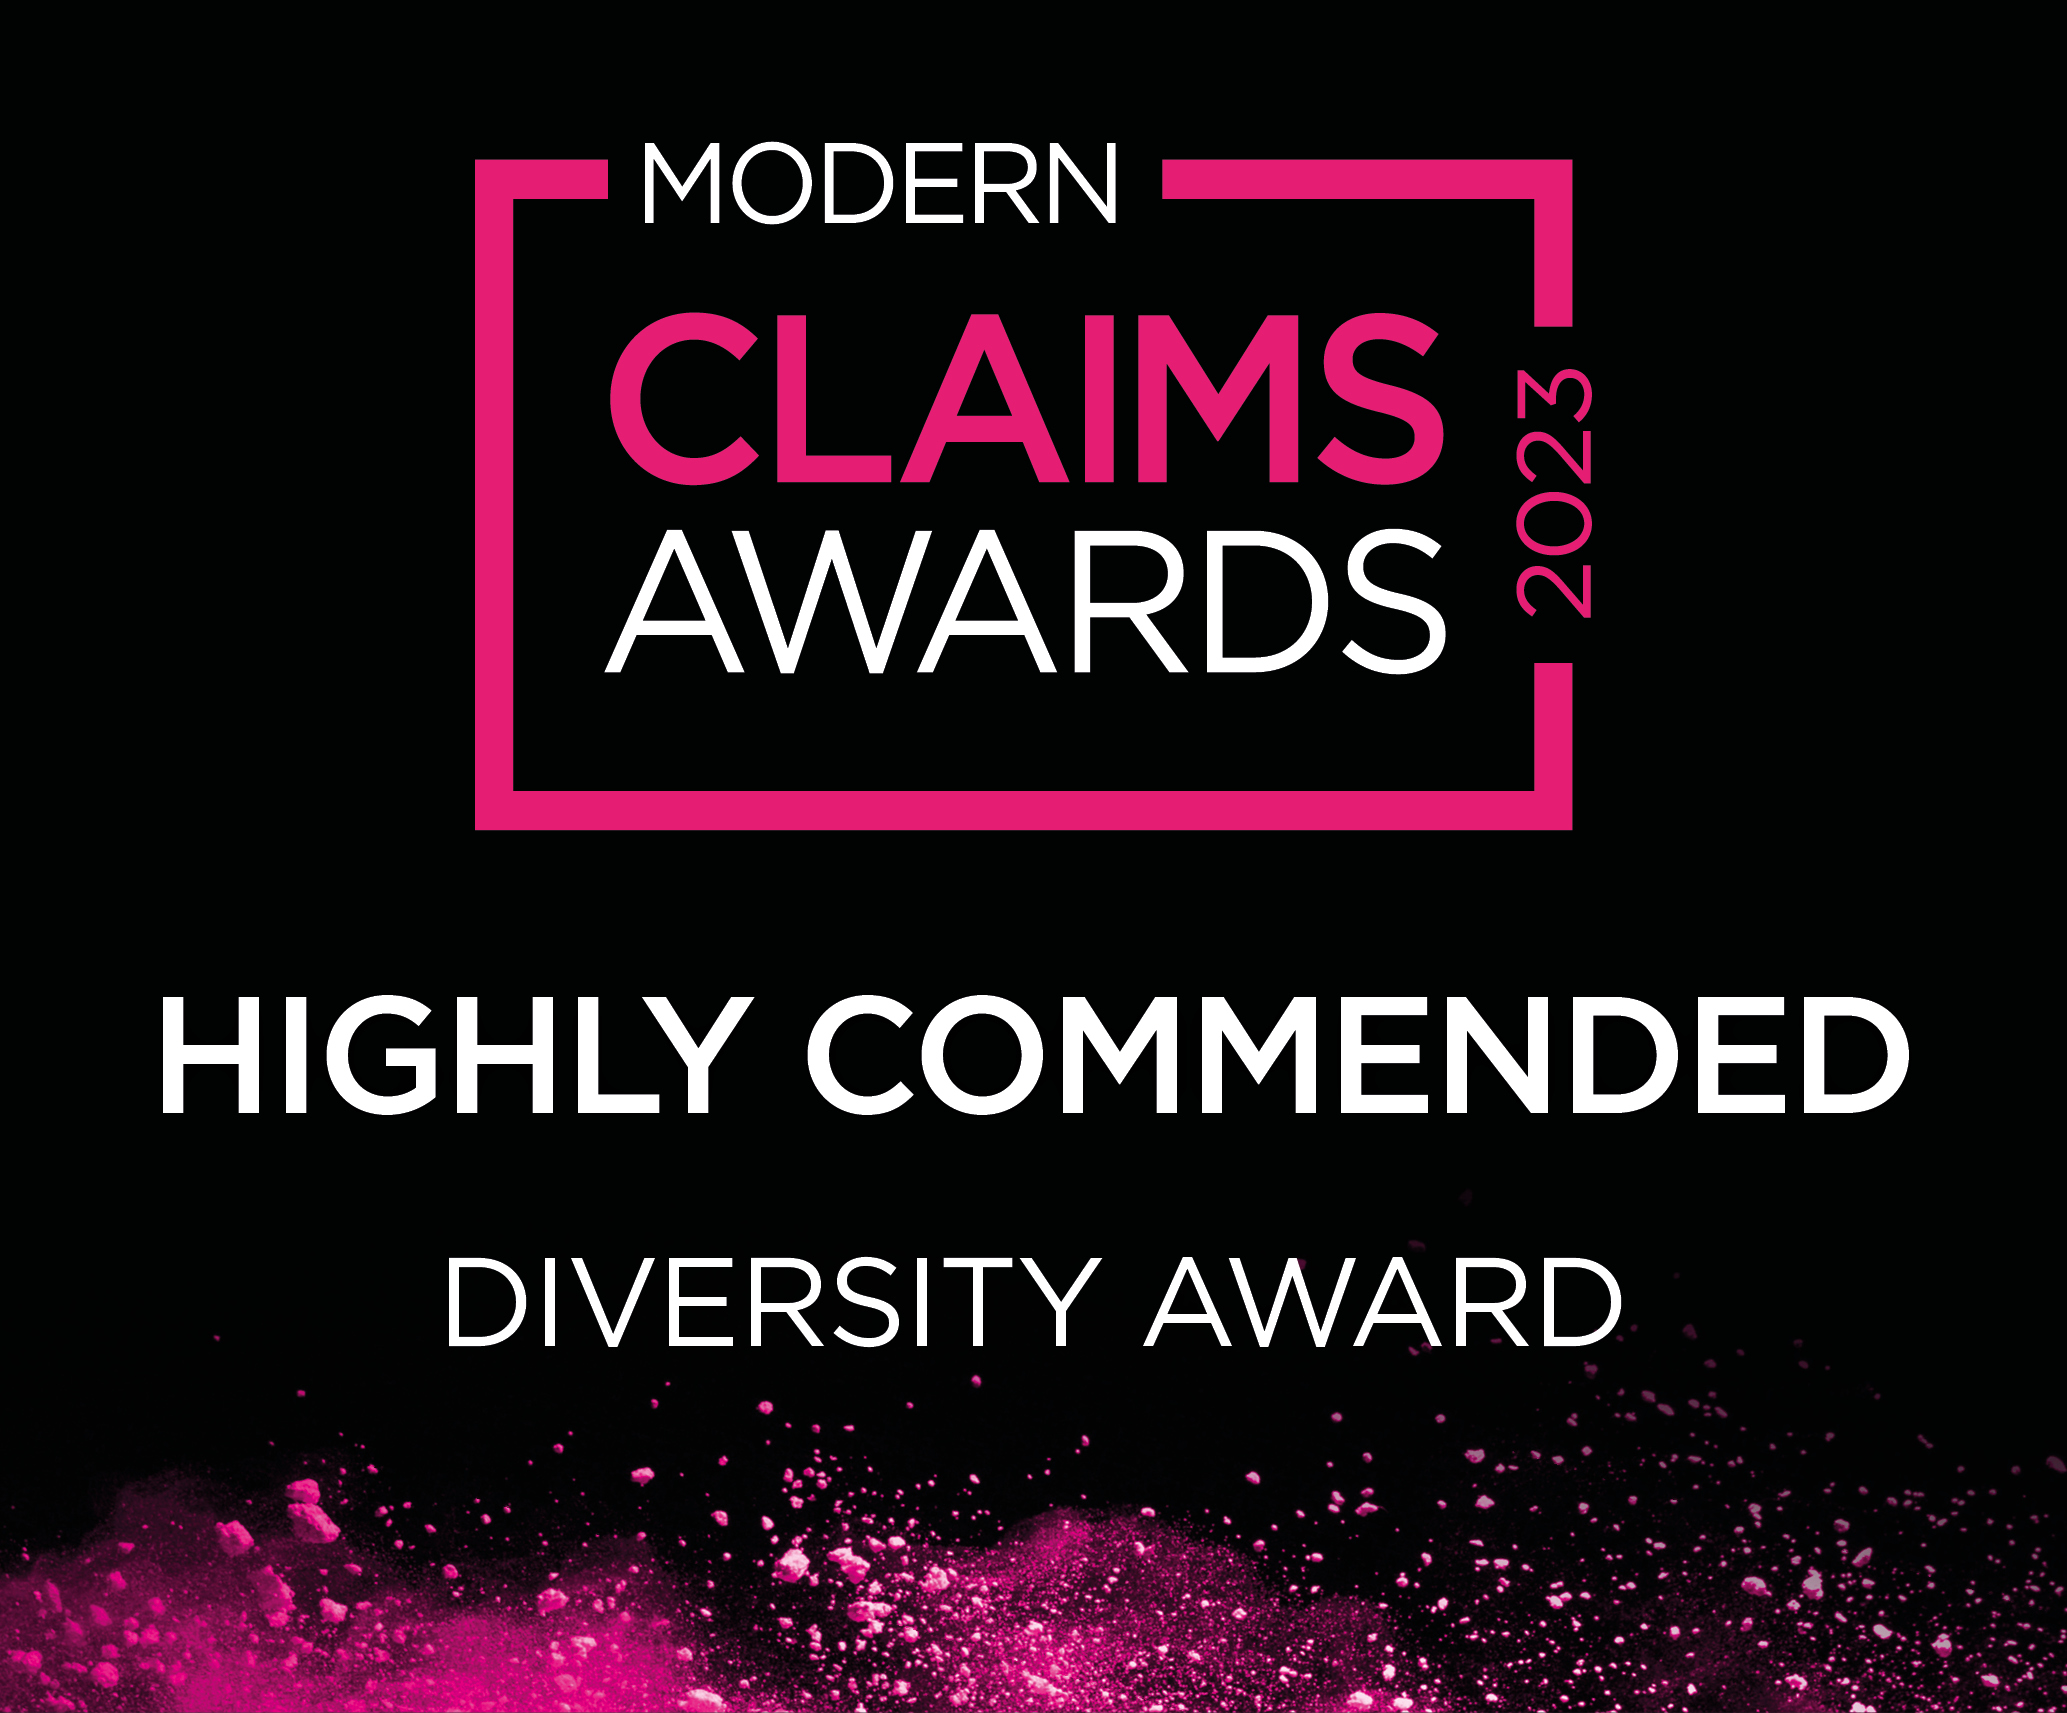 Parklane Plowden are Highly Commended at the Modern Claims Awards 2023